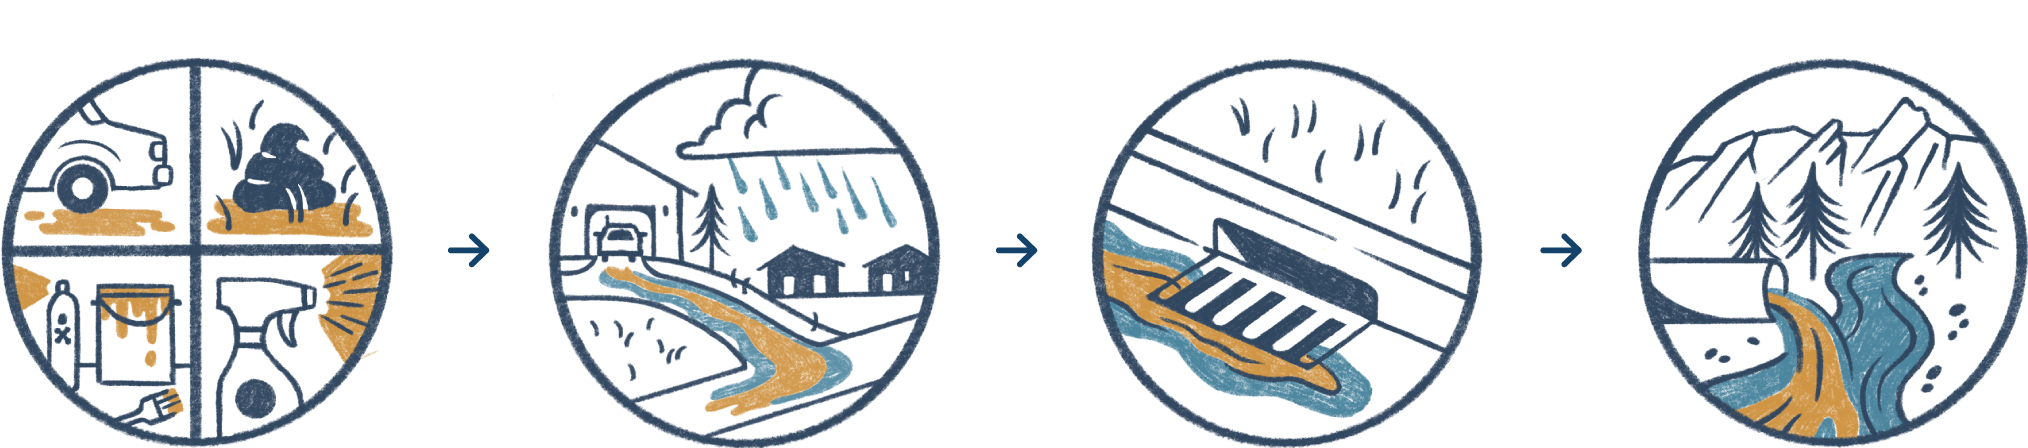 Steps stormwater takes from our homes to local waterways. Pollution from cars, pet waste, chemicals, and pesticides around our homes are picked up by rain. This rain enters nearby storm drains, which drain directly into local waterways.